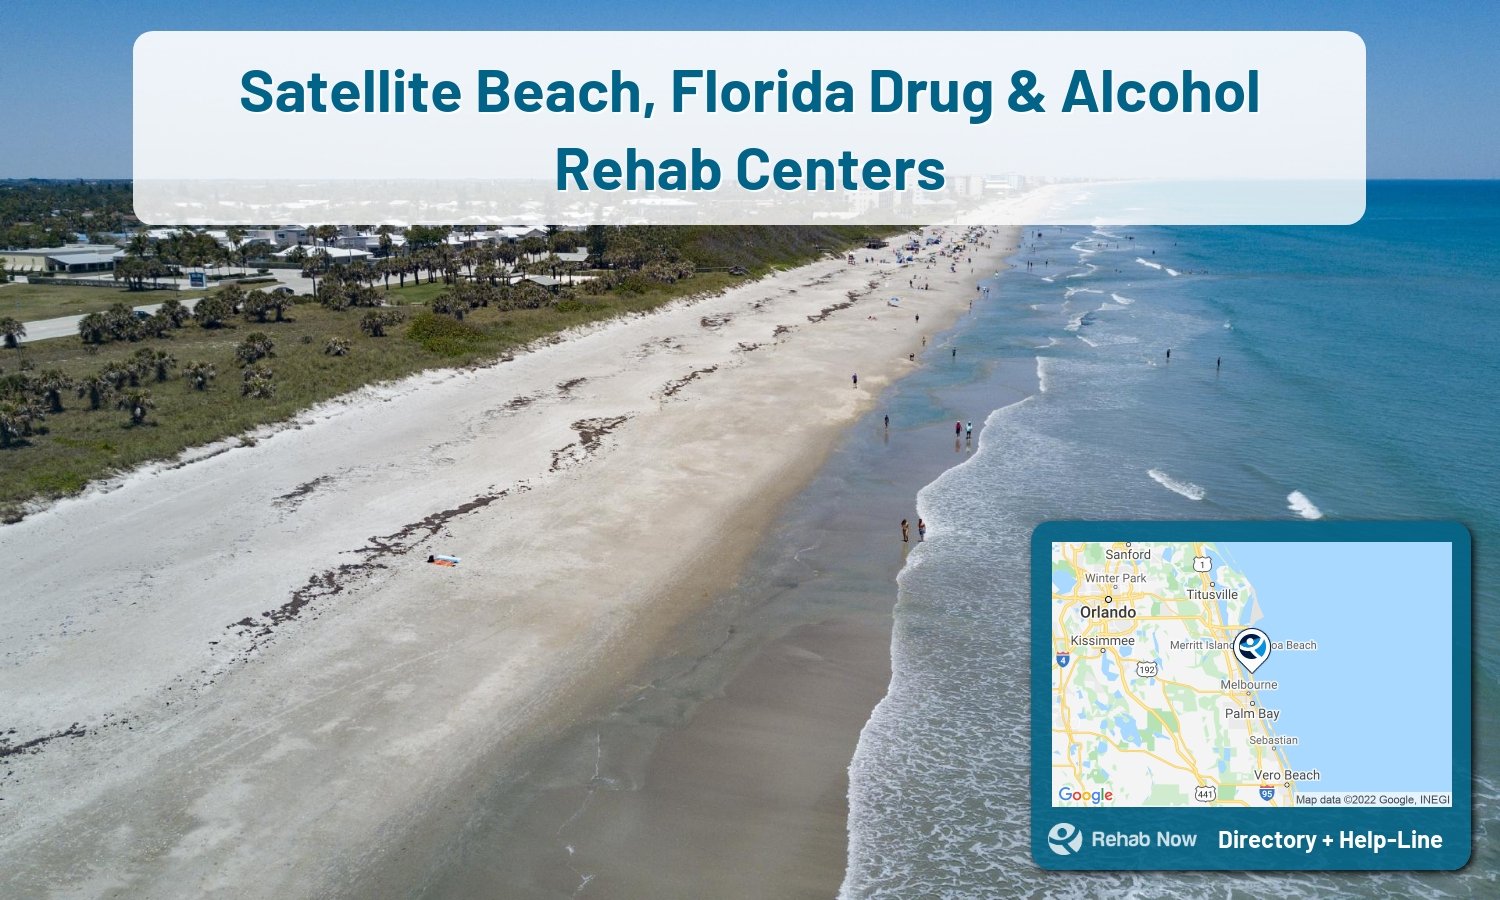 Need treatment nearby in Satellite Beach, Florida? Choose a drug/alcohol rehab center from our list, or call our hotline now for free help.